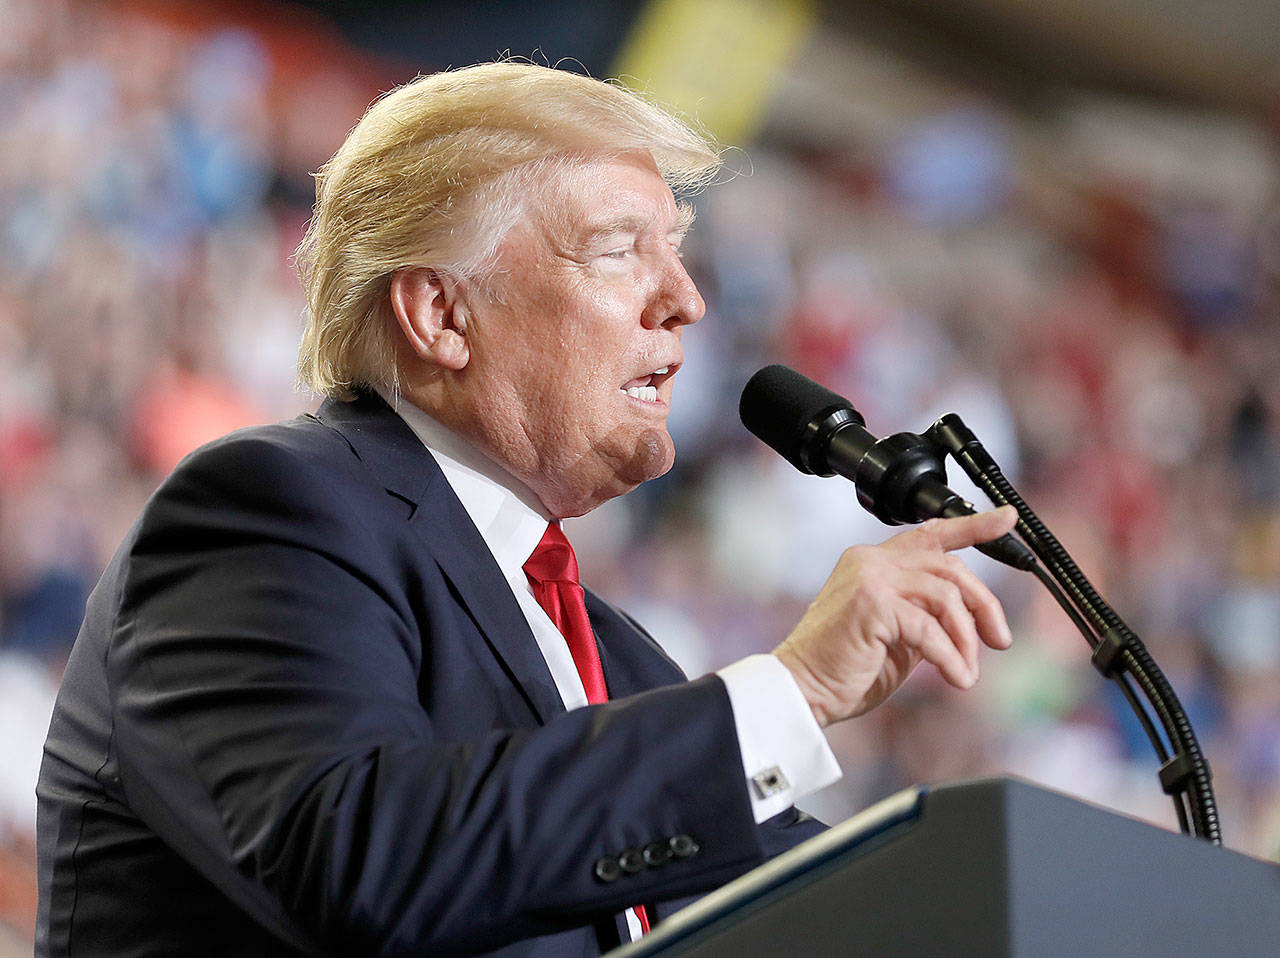 President Donald Trump speaks at a rally in Harrisburg, Pennsylvania, on Saturday, the 100th day of his presidency. (AP Photo/Carolyn Kaster)